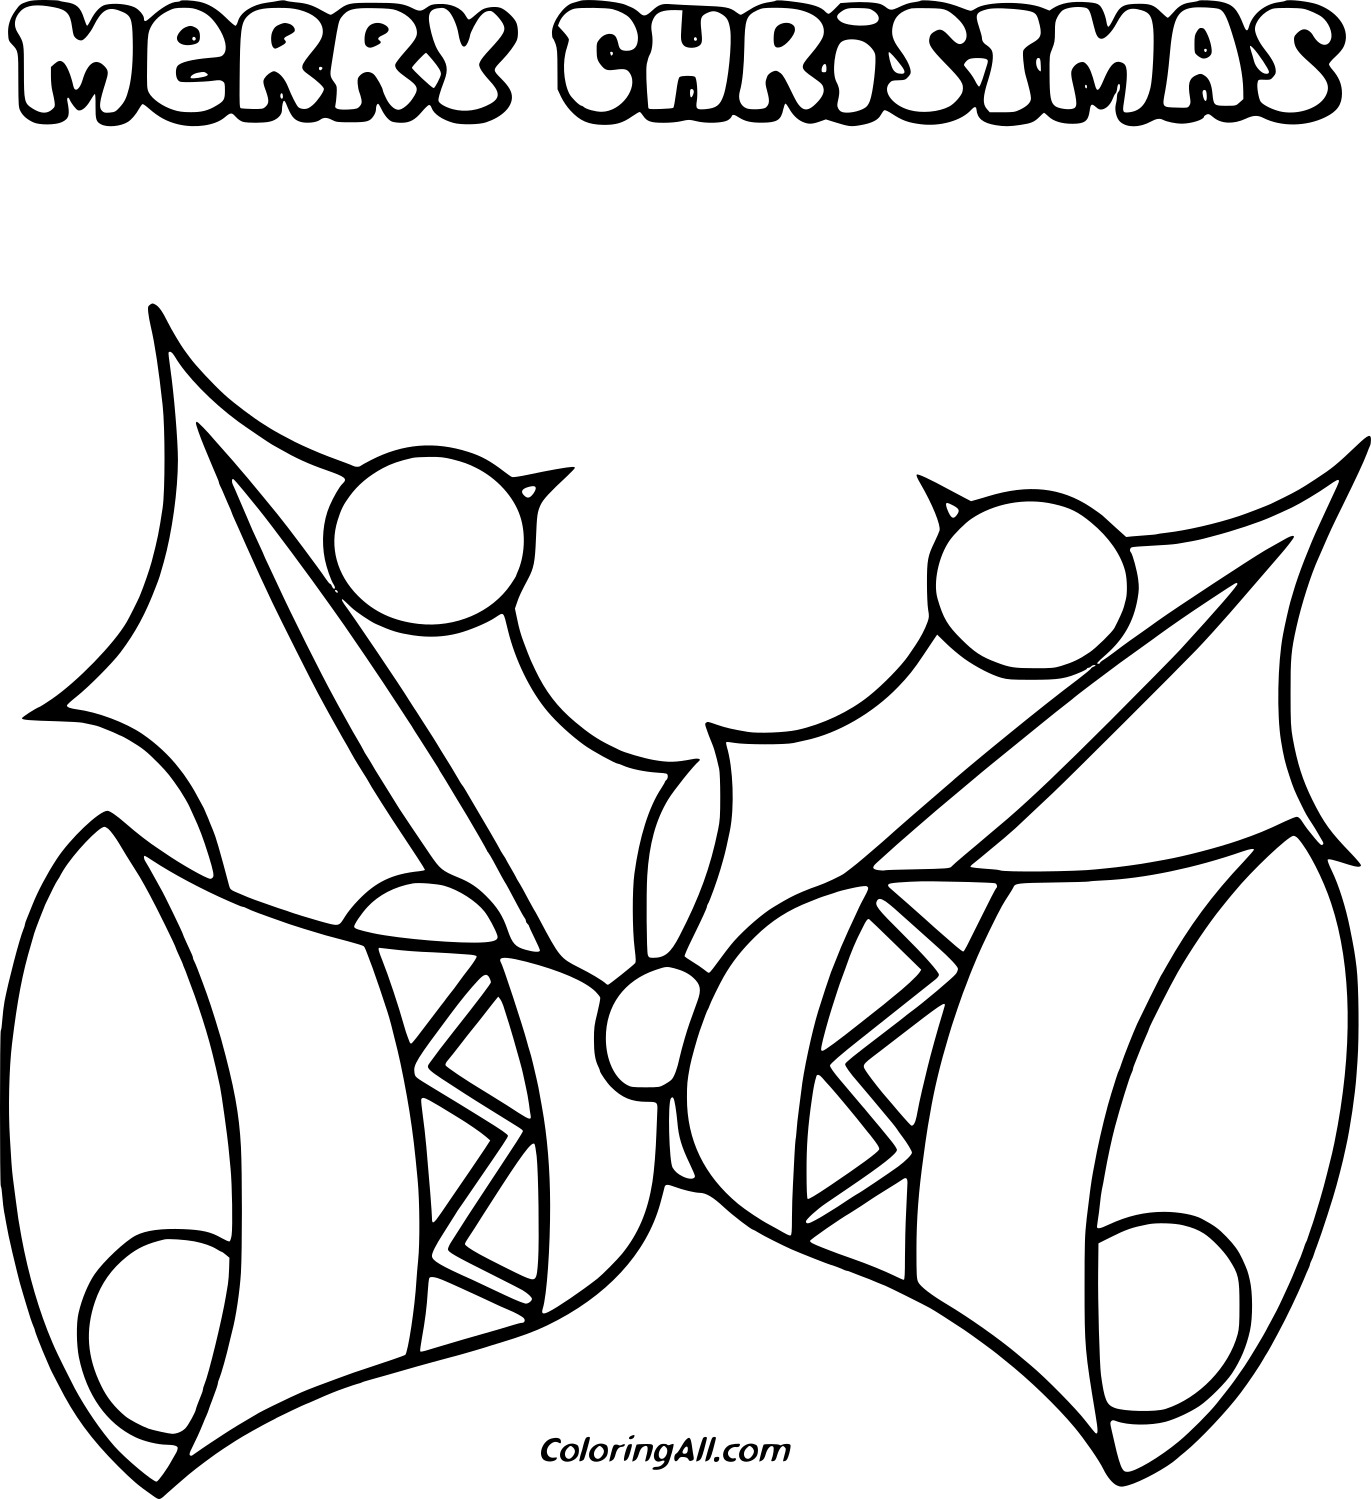 Merry Christmas Bells Image For Kids Coloring Page